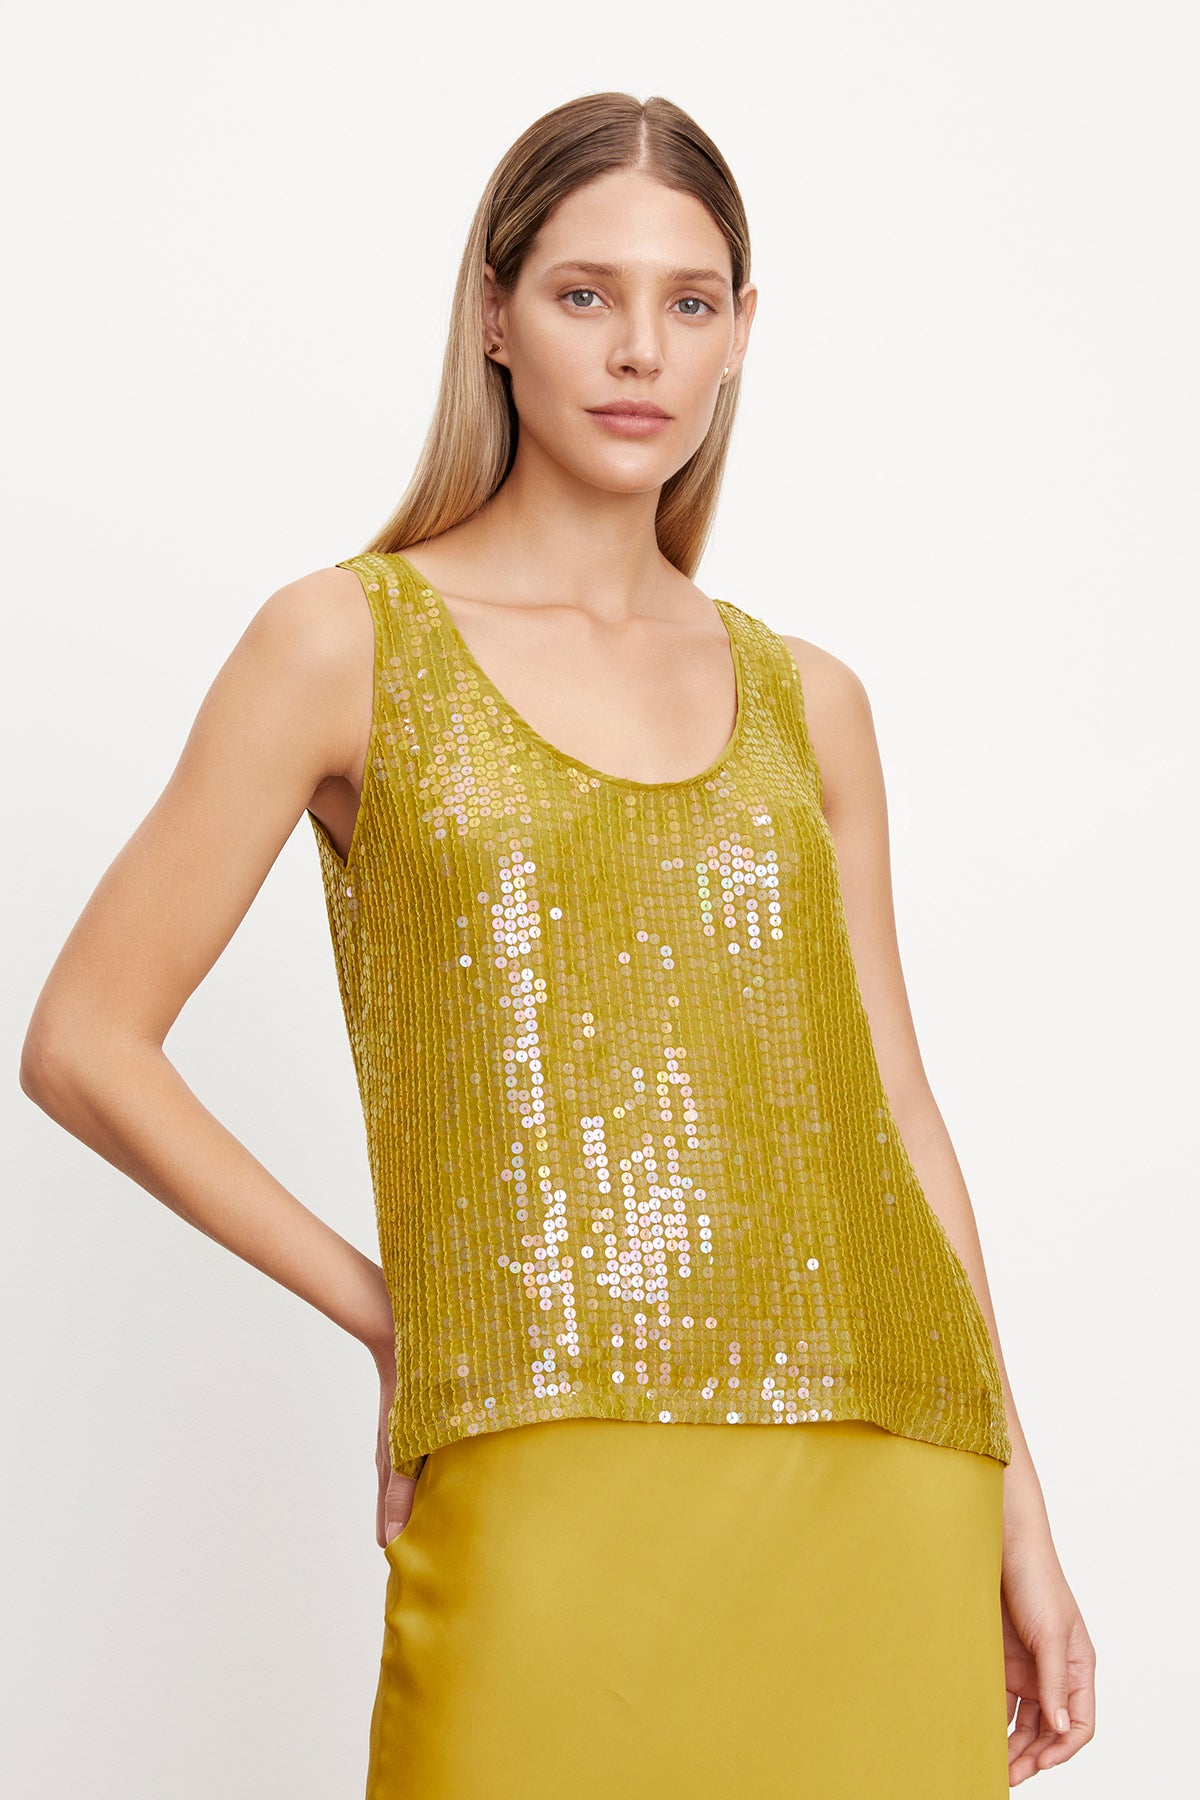 The model is wearing a chic, yellow BEHATI SEQUIN TANK TOP with a-line silhouette from Velvet by Graham & Spencer.-35577743966401